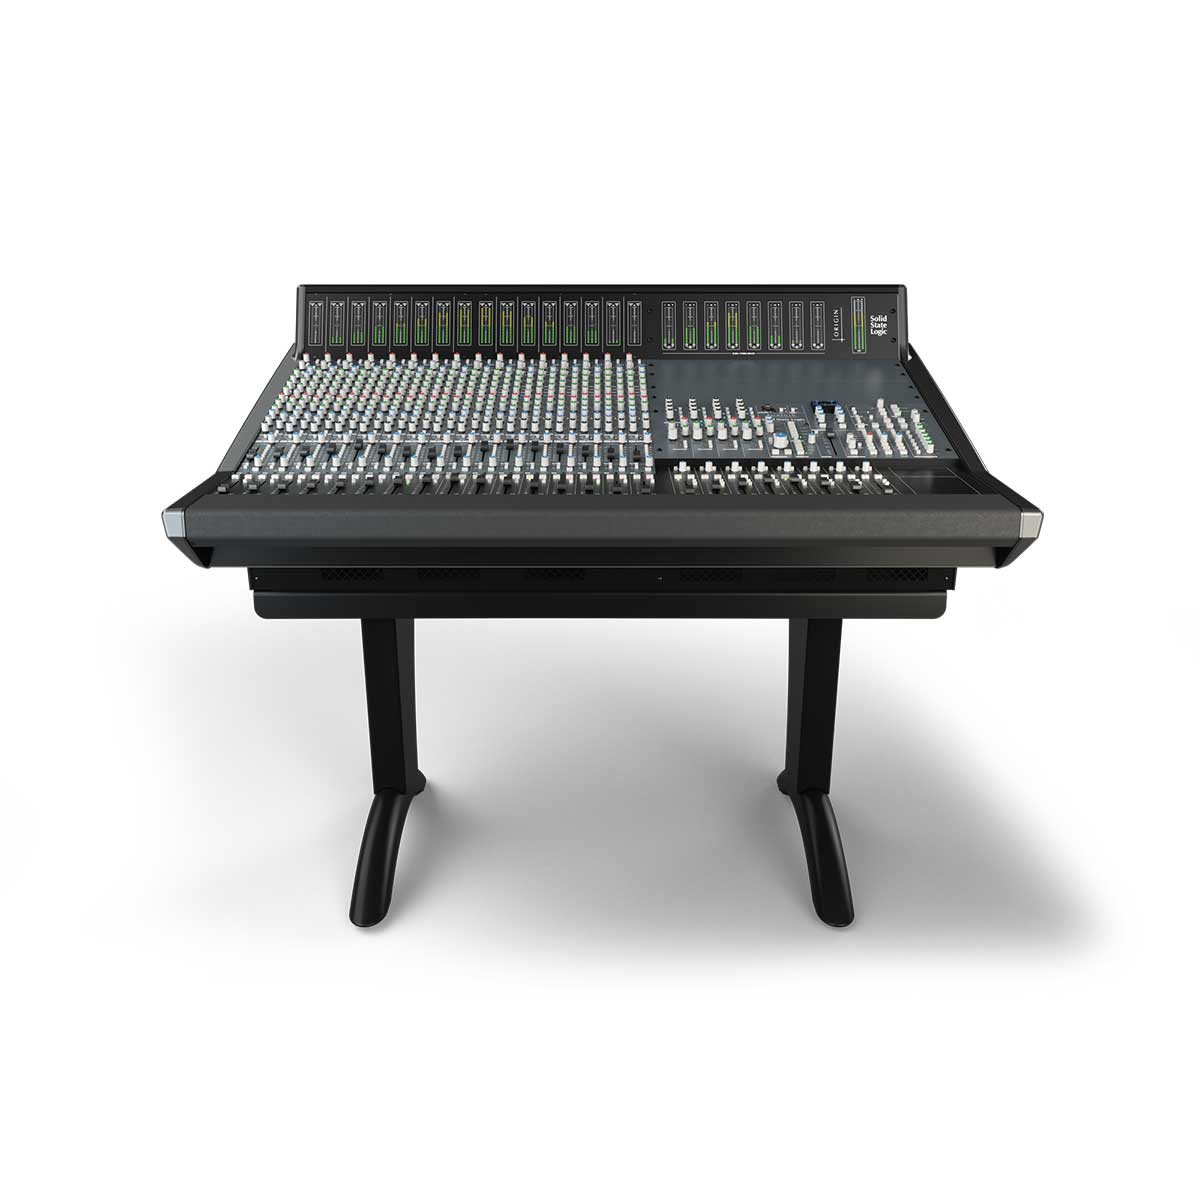 Solid State Logic Origin 16 Channel Analogue In-Line Console